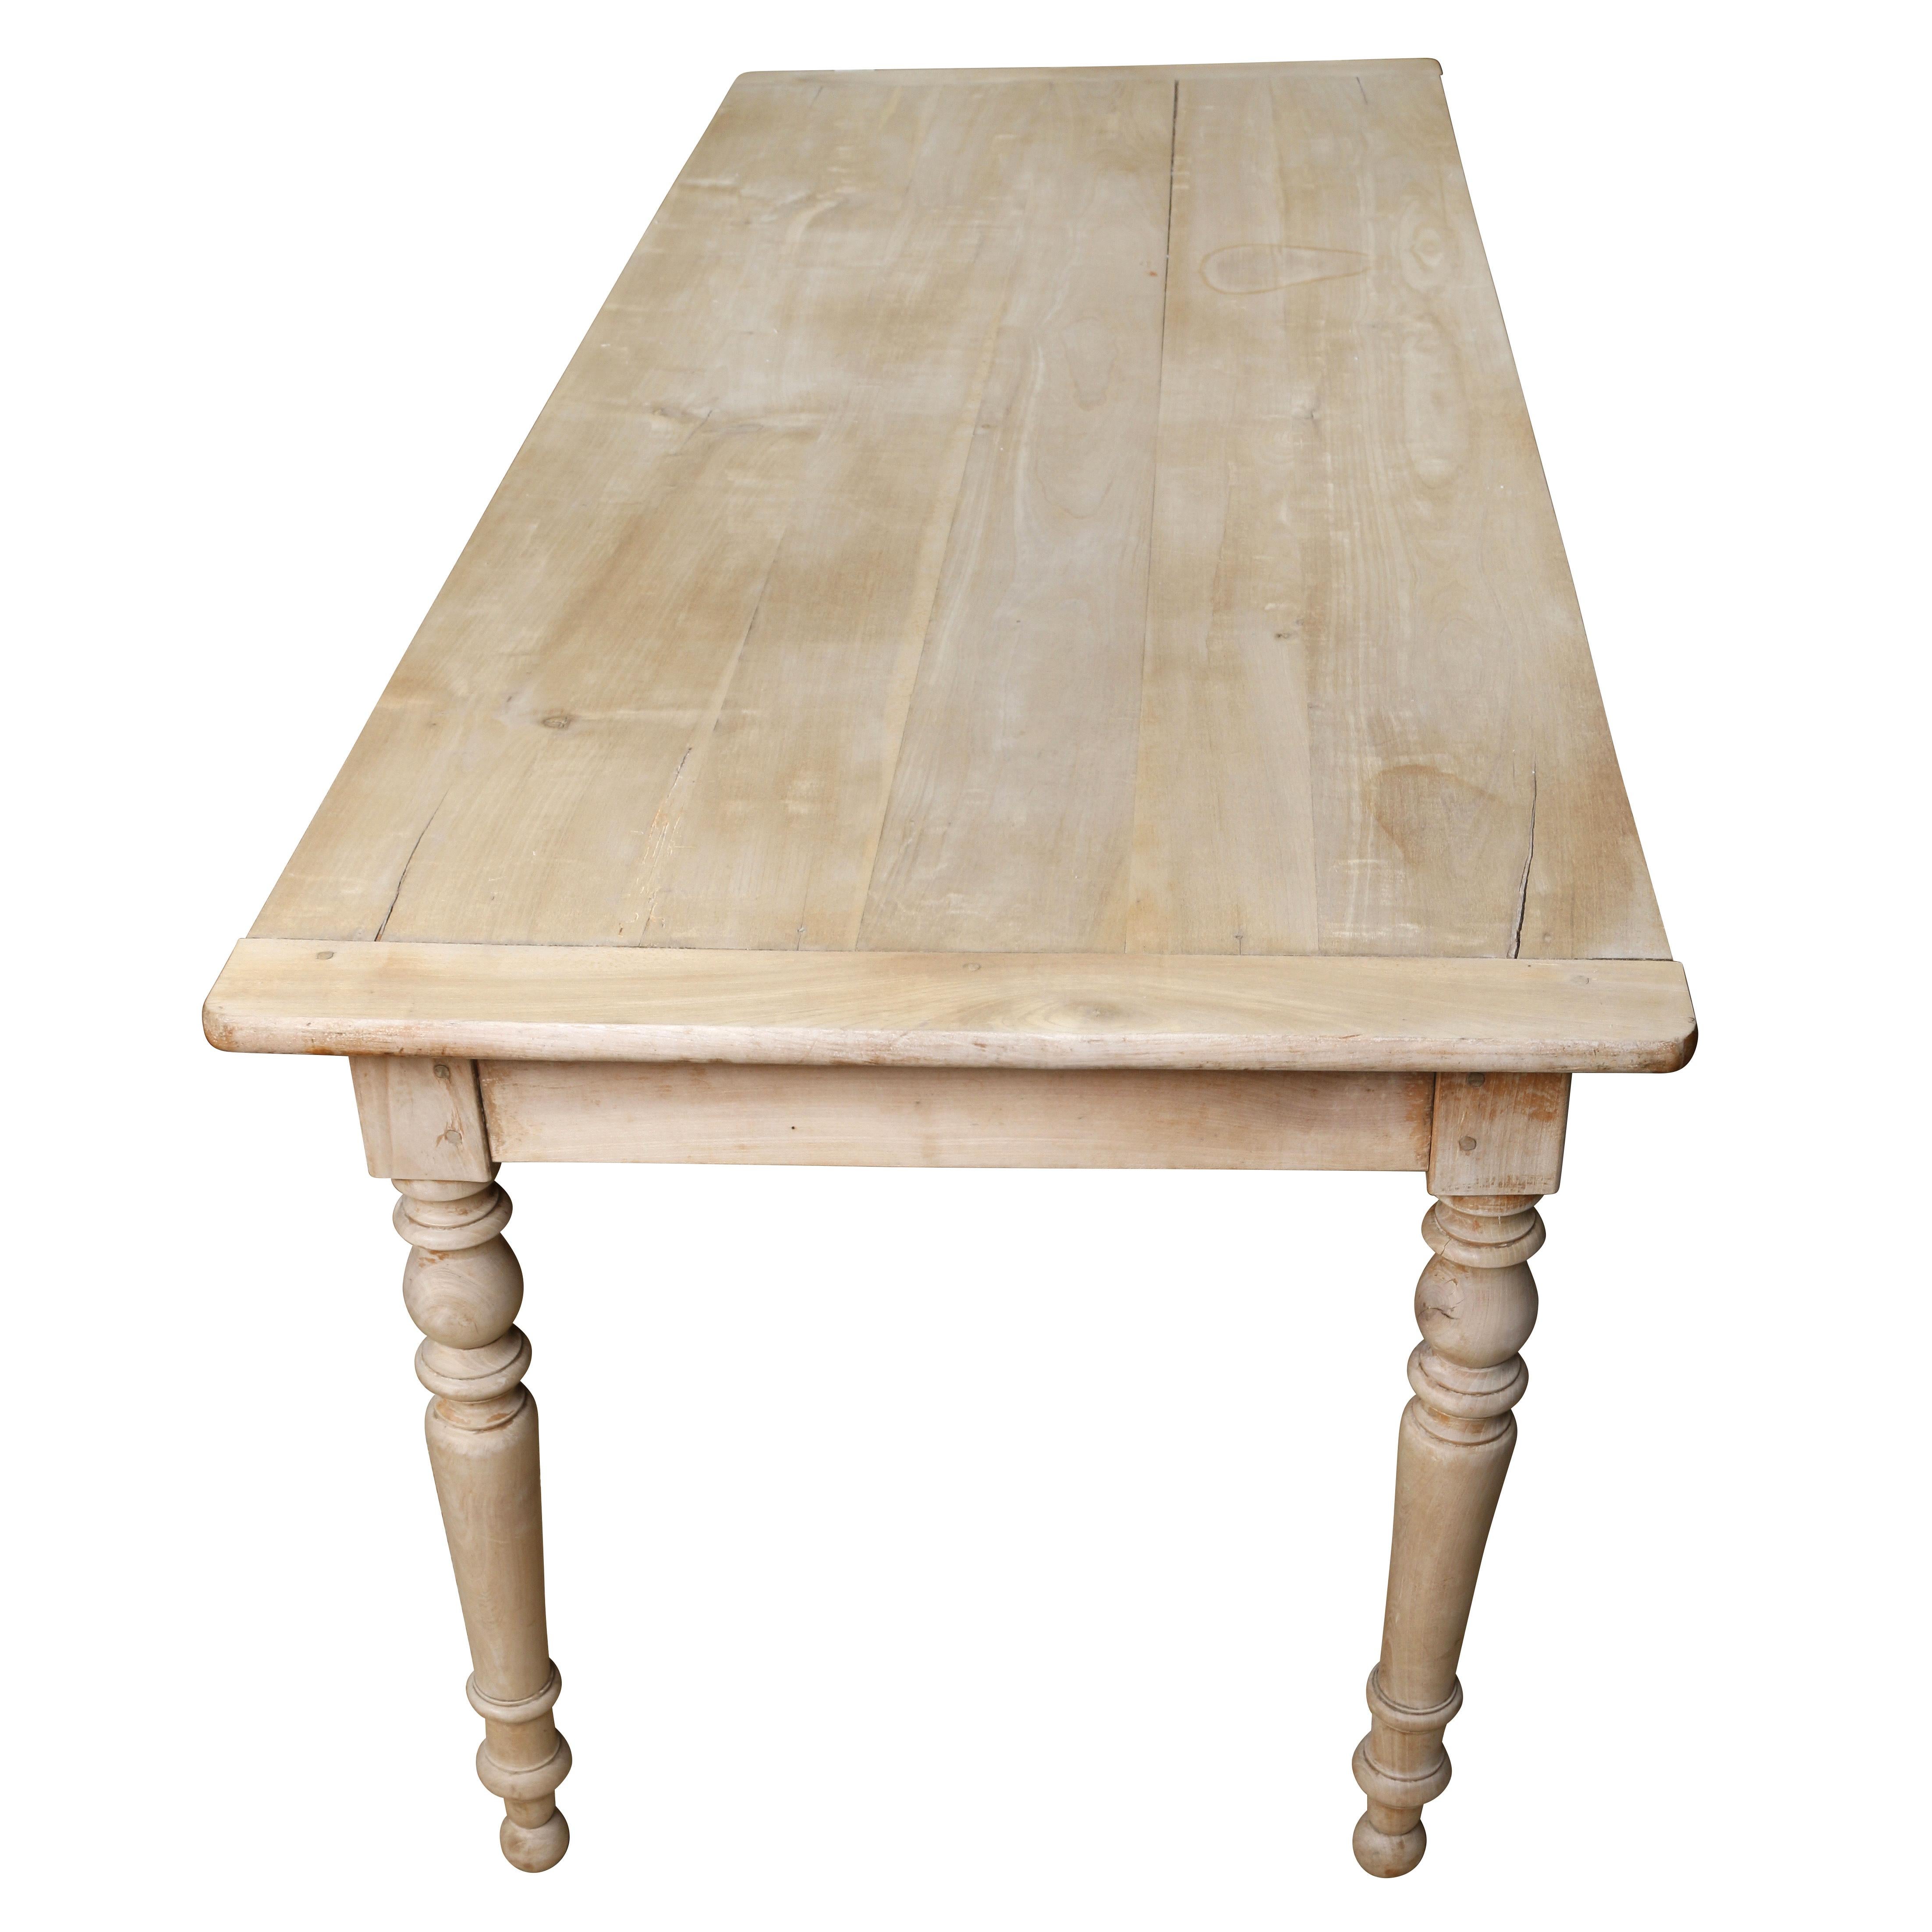 A charming bleached pine wood French dining table with one drawer. The top constructed of several long planks running the length of the table, with two planks at each end. It is raised on turned legs with nice detail. It's bleached finish gives it a